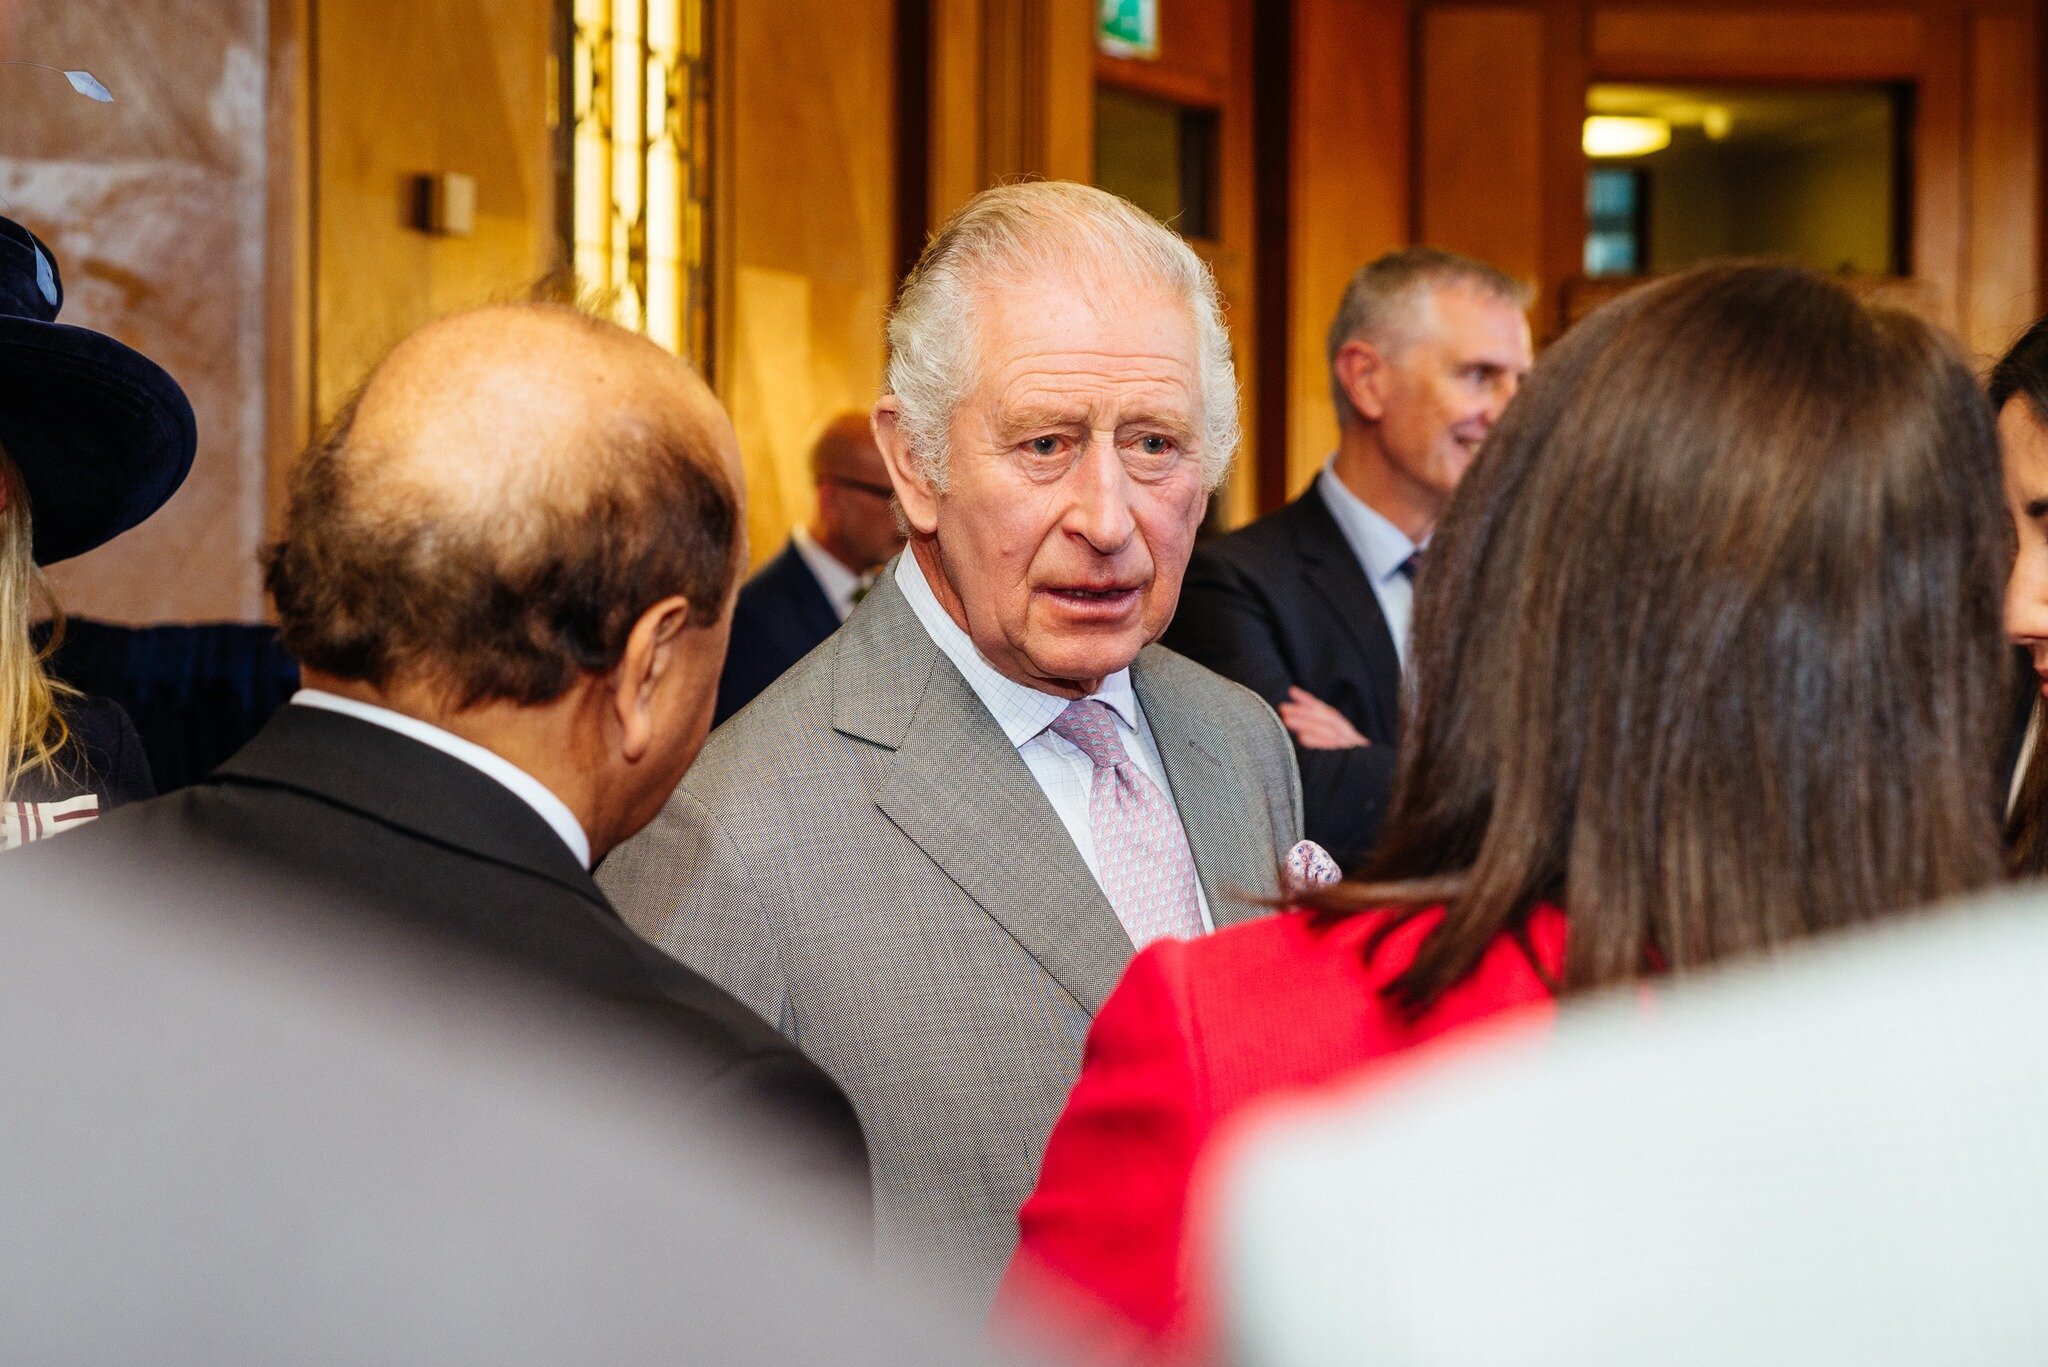 A very special day for Luton today as His Majesty King Charles III visited the town today. He met community leaders and volunteers in the Town Hall then boarded the Luton DART fast passenger transit for a journey to London Luton Airport. I was kindly